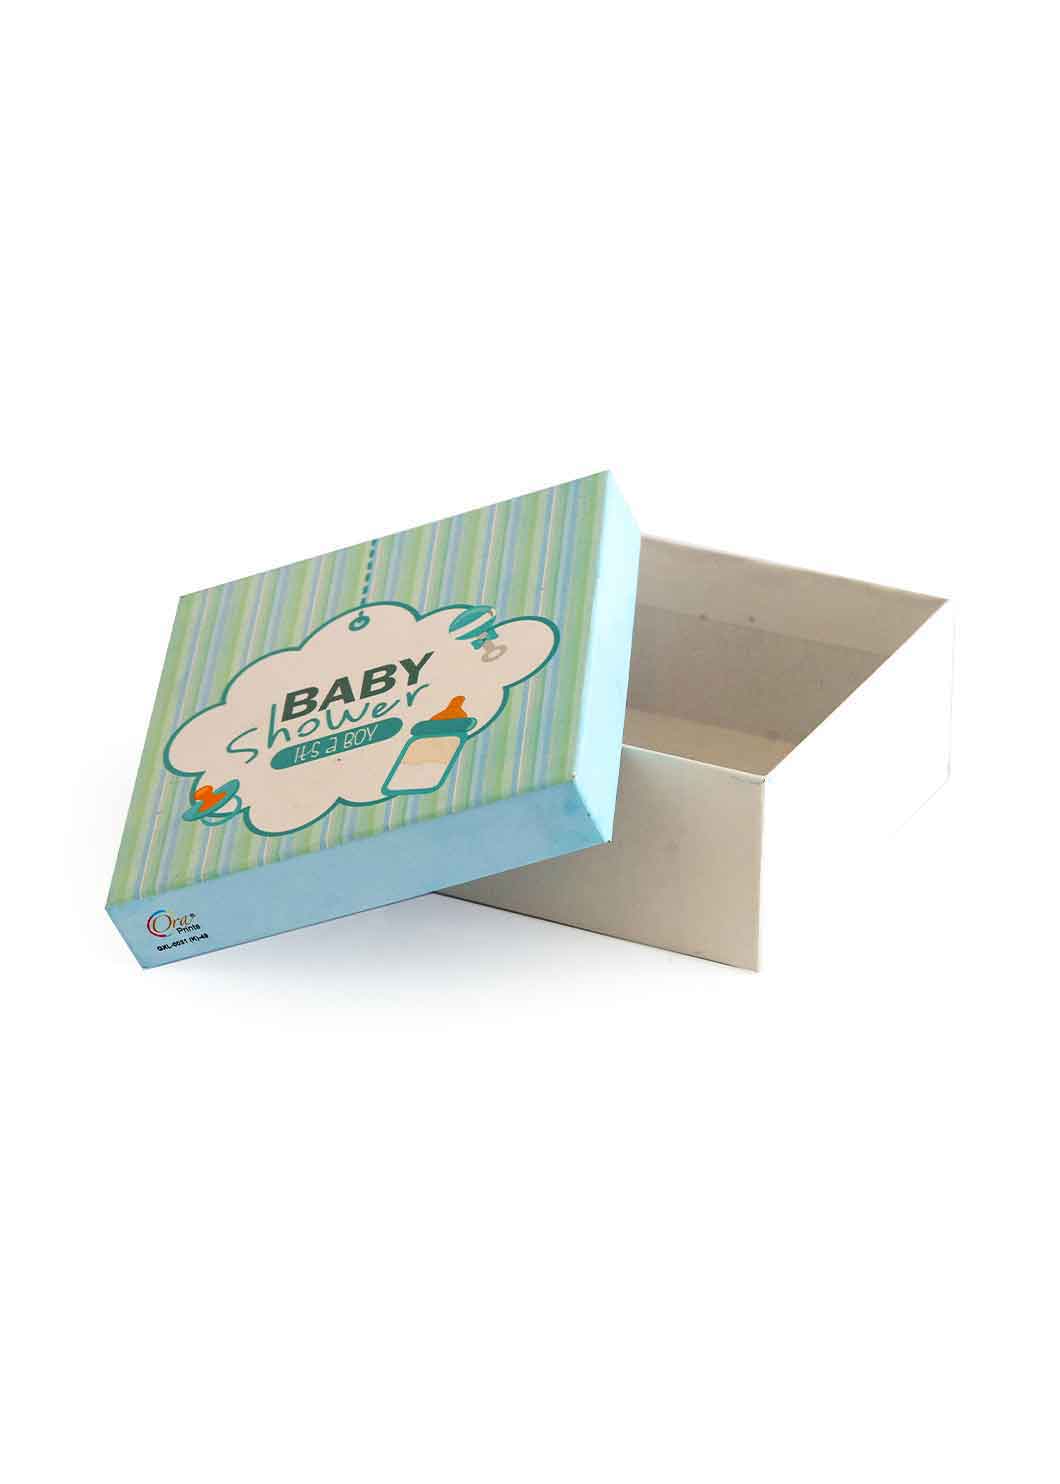 Baby Shower Box for Packing - Sweet Box - Baby Shower Printed